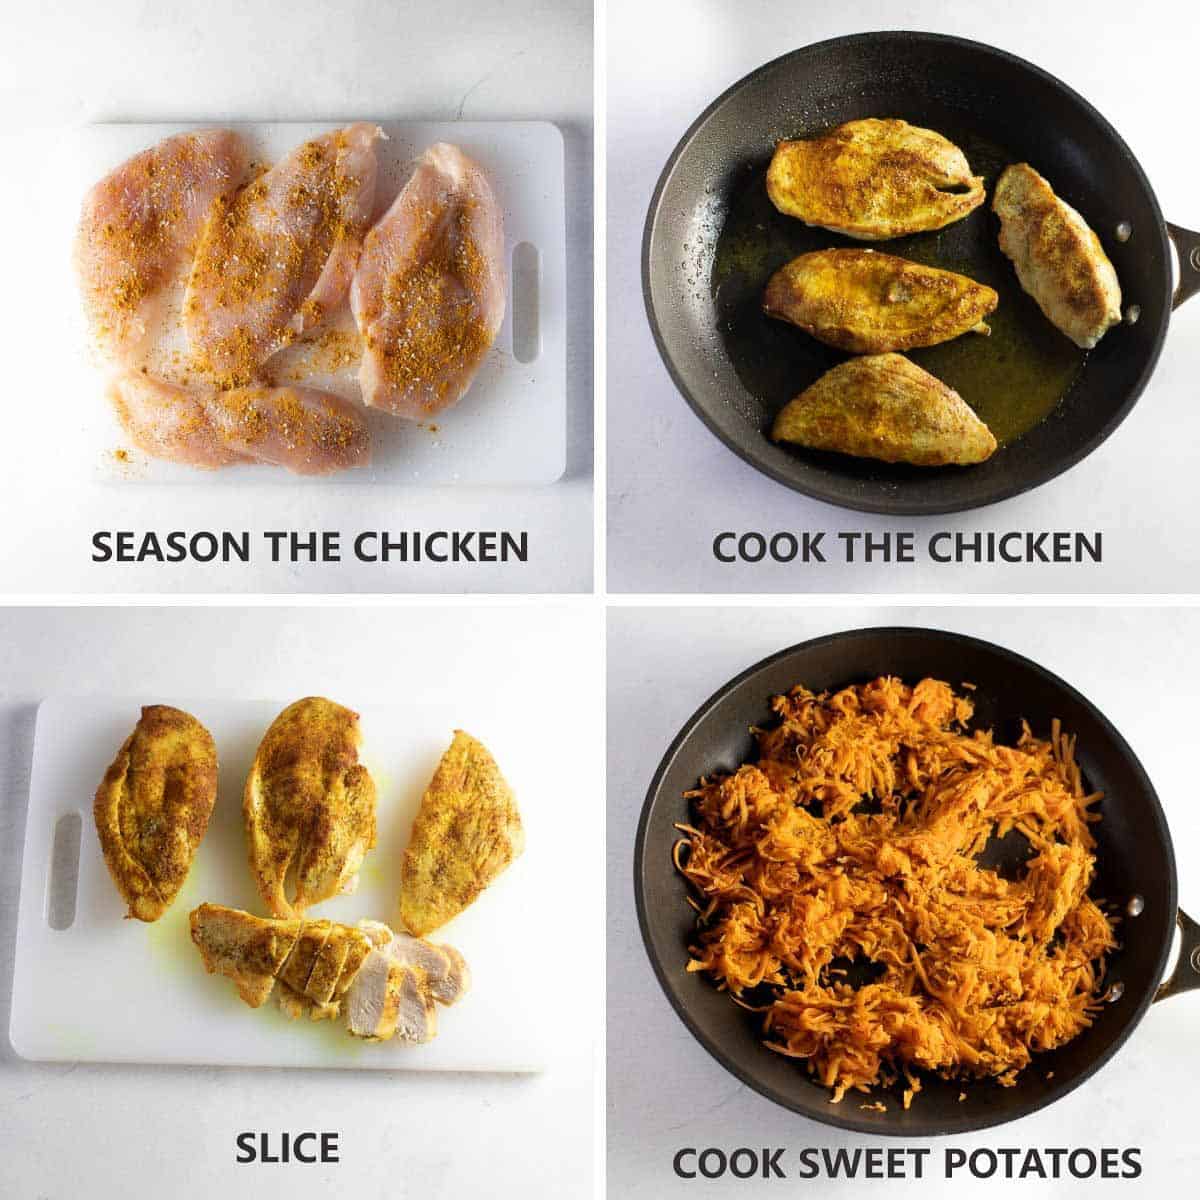 how to cook the chicken and sweet potato for the salad